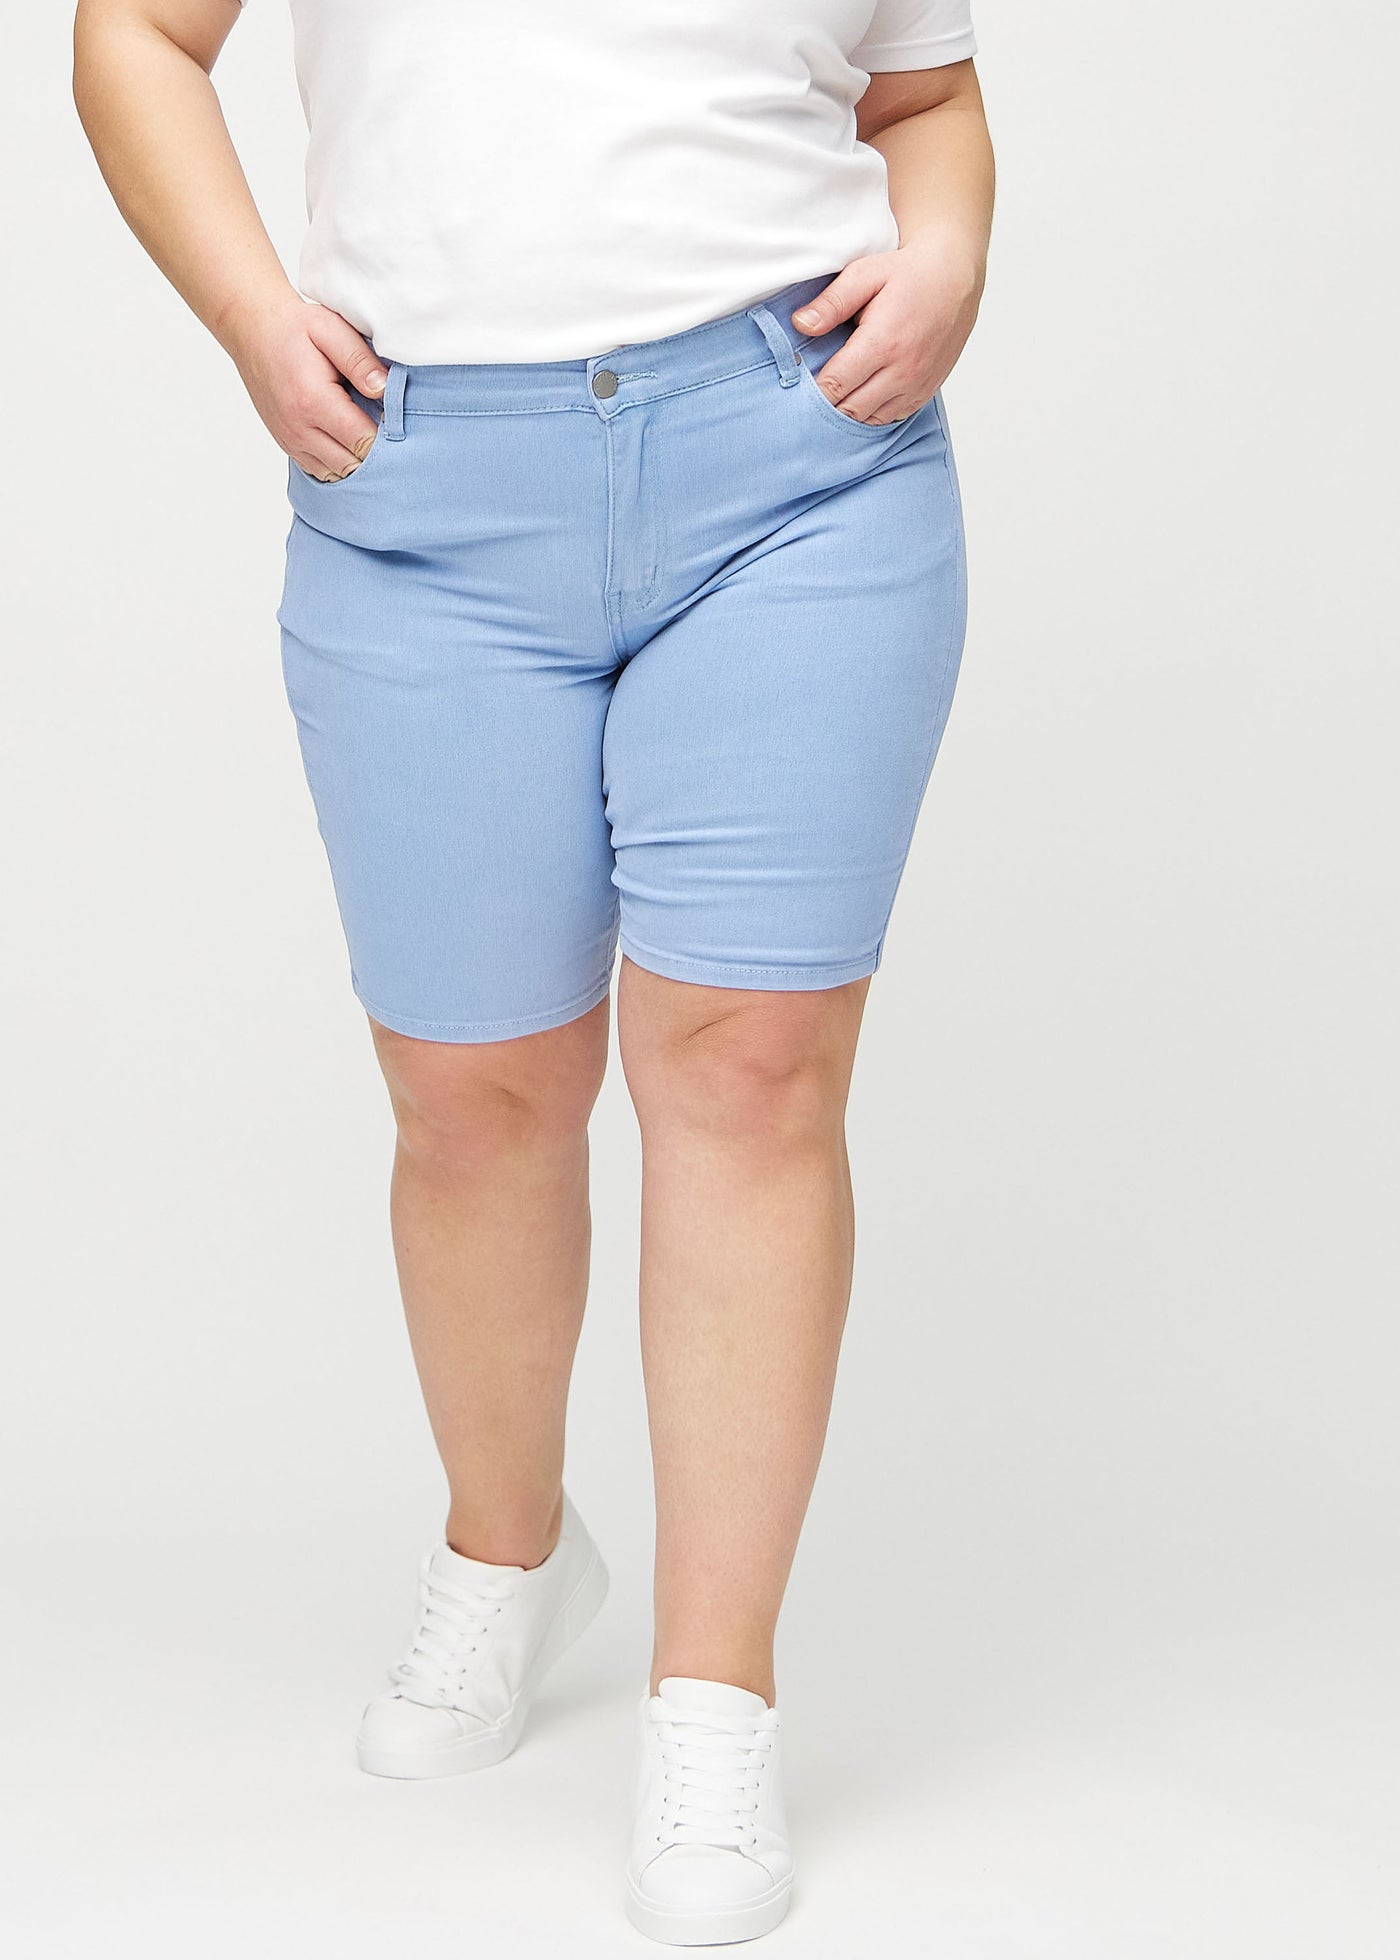 Perfect Shorts - Middle - Skinny - Skies™